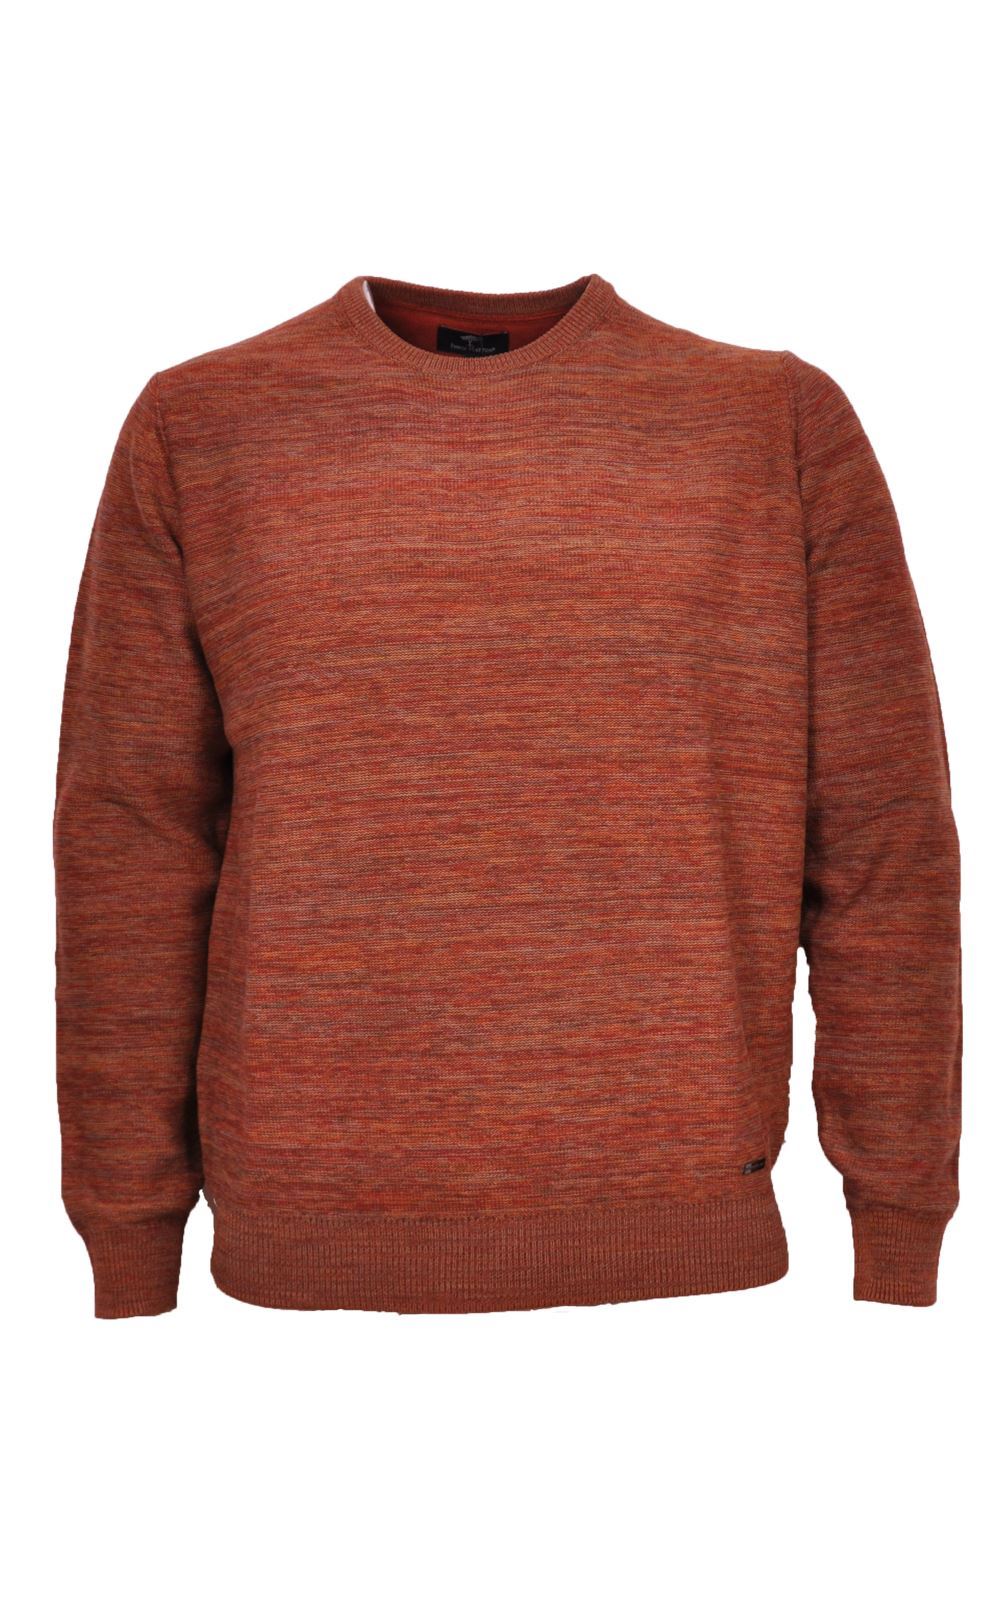 S&T Moore. Fynch Hatton Crew Neck Pullover 1220-209